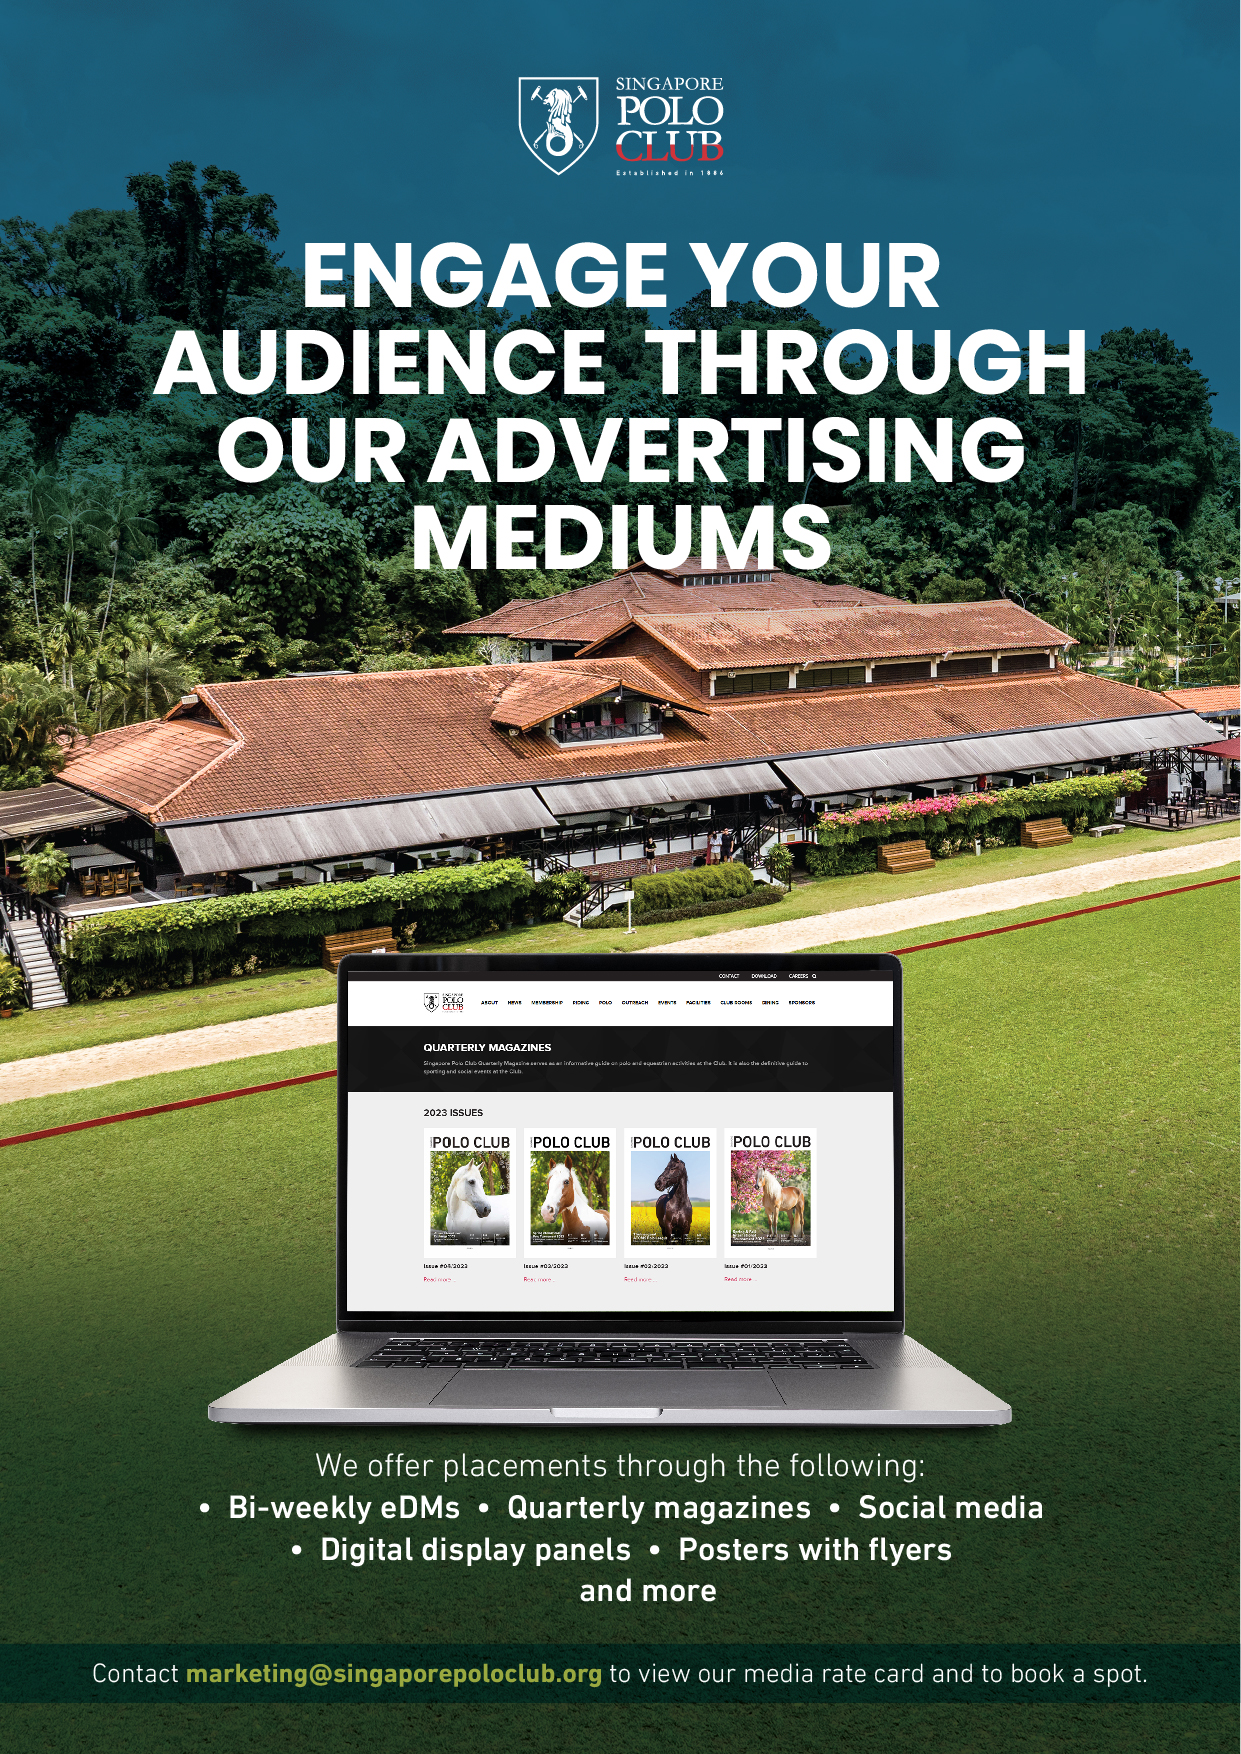 Engage Your Audience Through Our Advertising Mediums